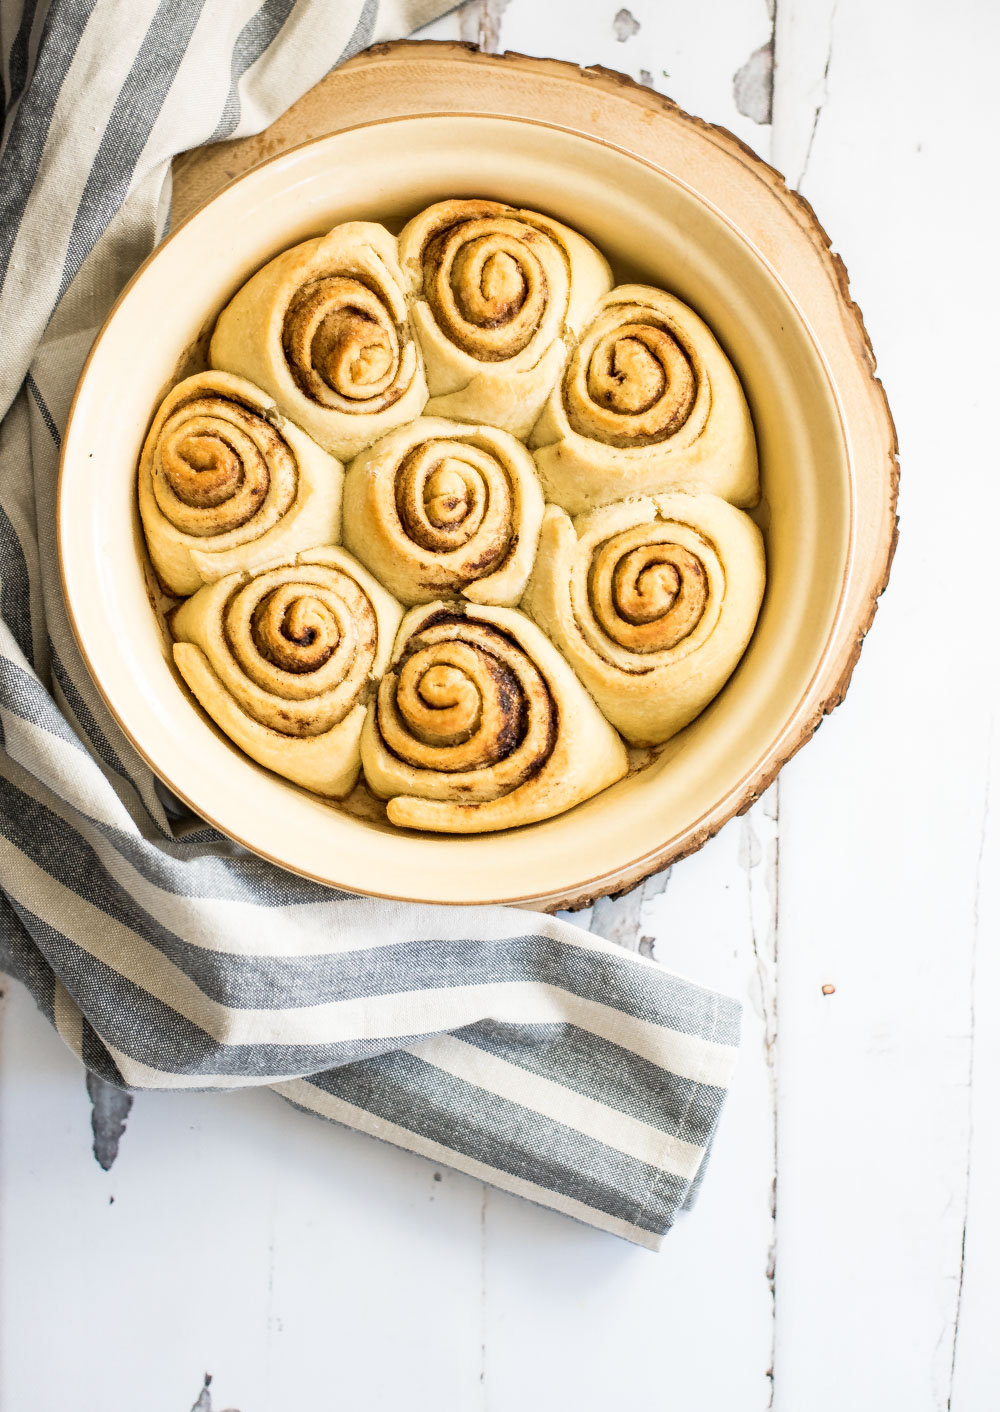 Cinnamon rolls were never so easy to make! These vegan cinnamon rolls only require a handful of ingredients and super simple instructions. Make them soon!